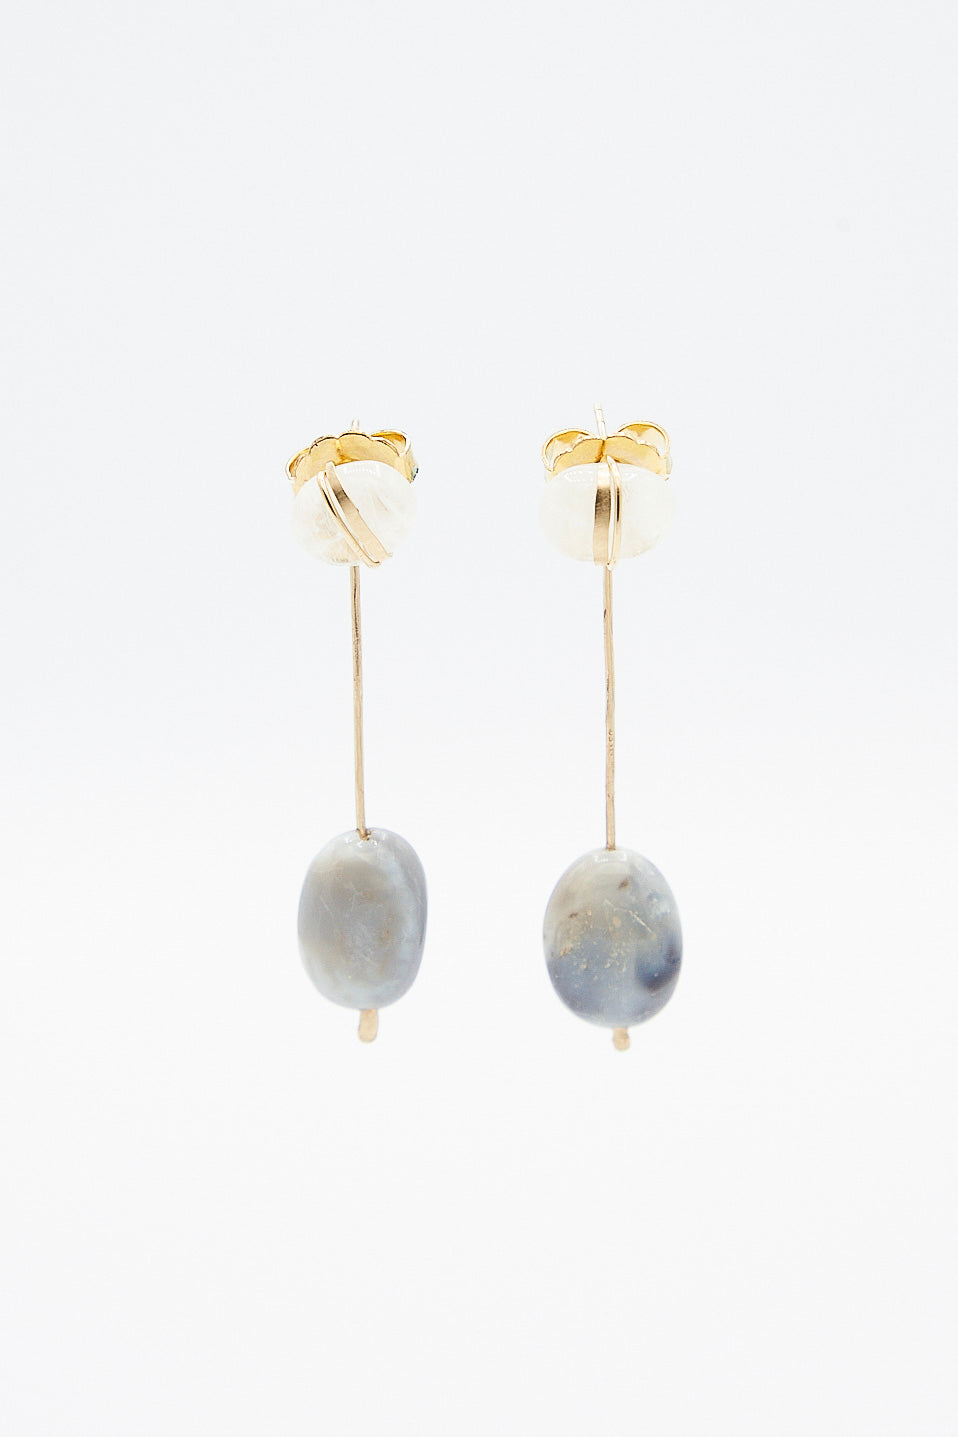 A pair of Mary MacGill Sculpture Earrings in Cottonwood II with blue and white beads.